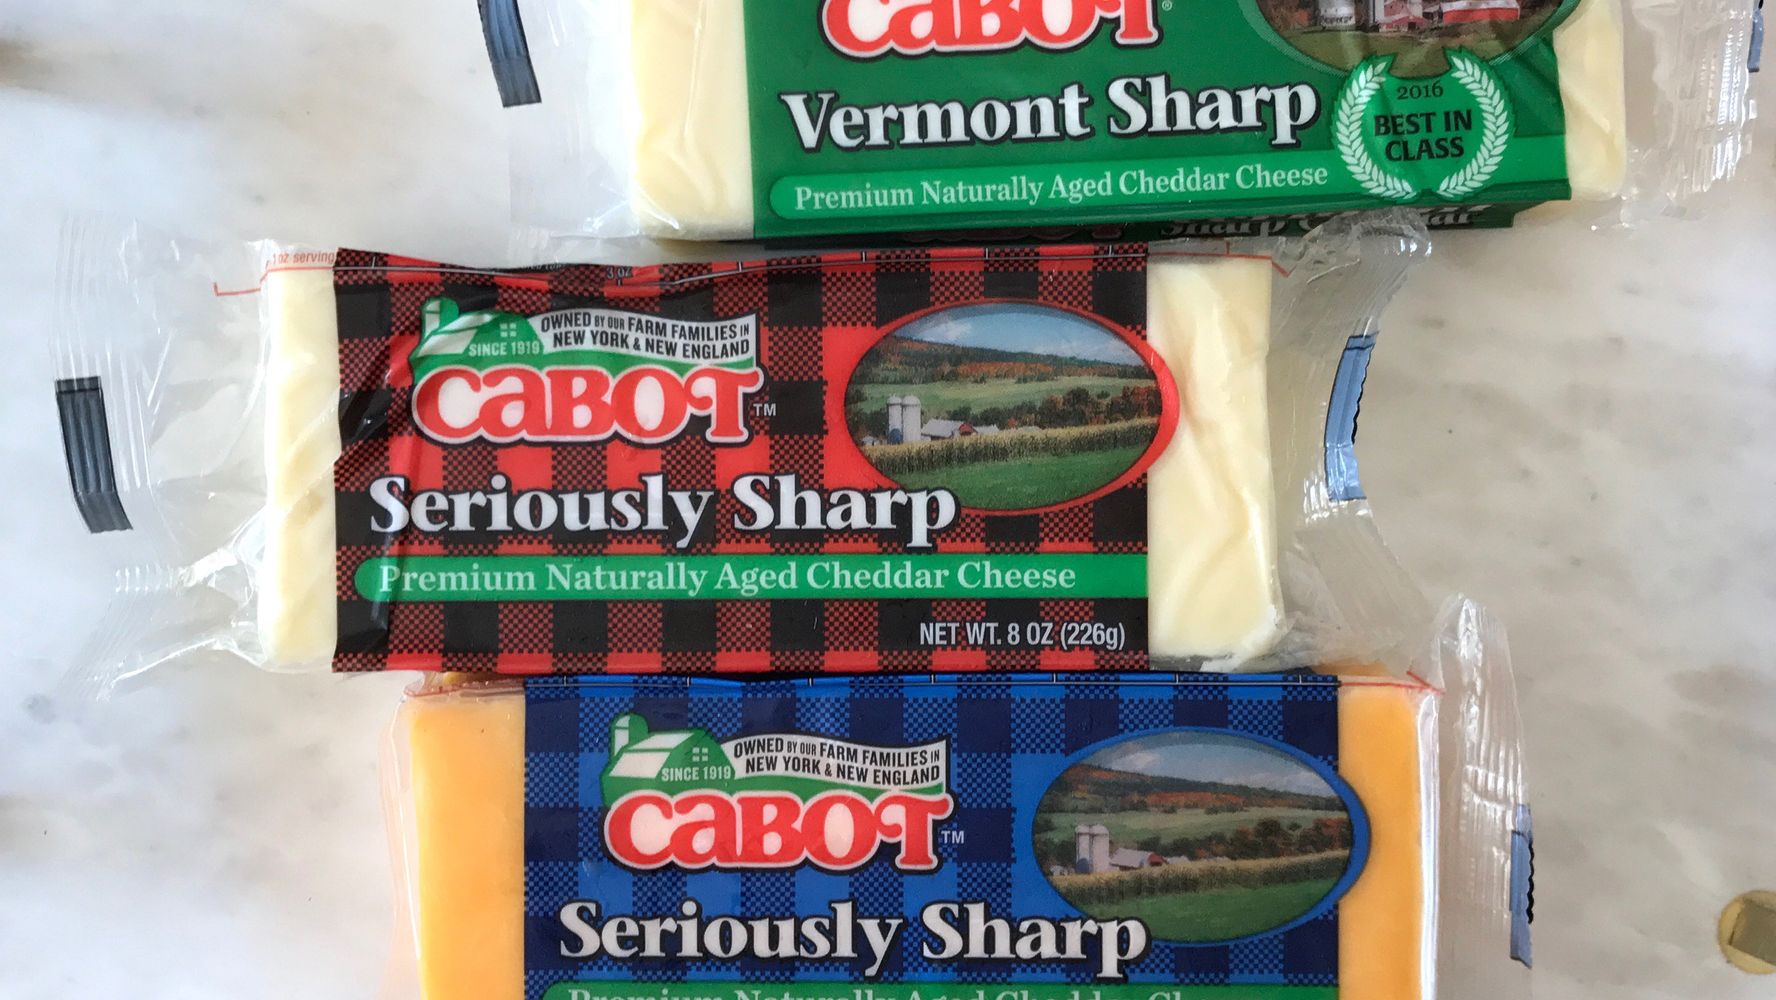 Cabot Creamery Vermont Seriously Sharp Cheddar Cheese, 8 oz